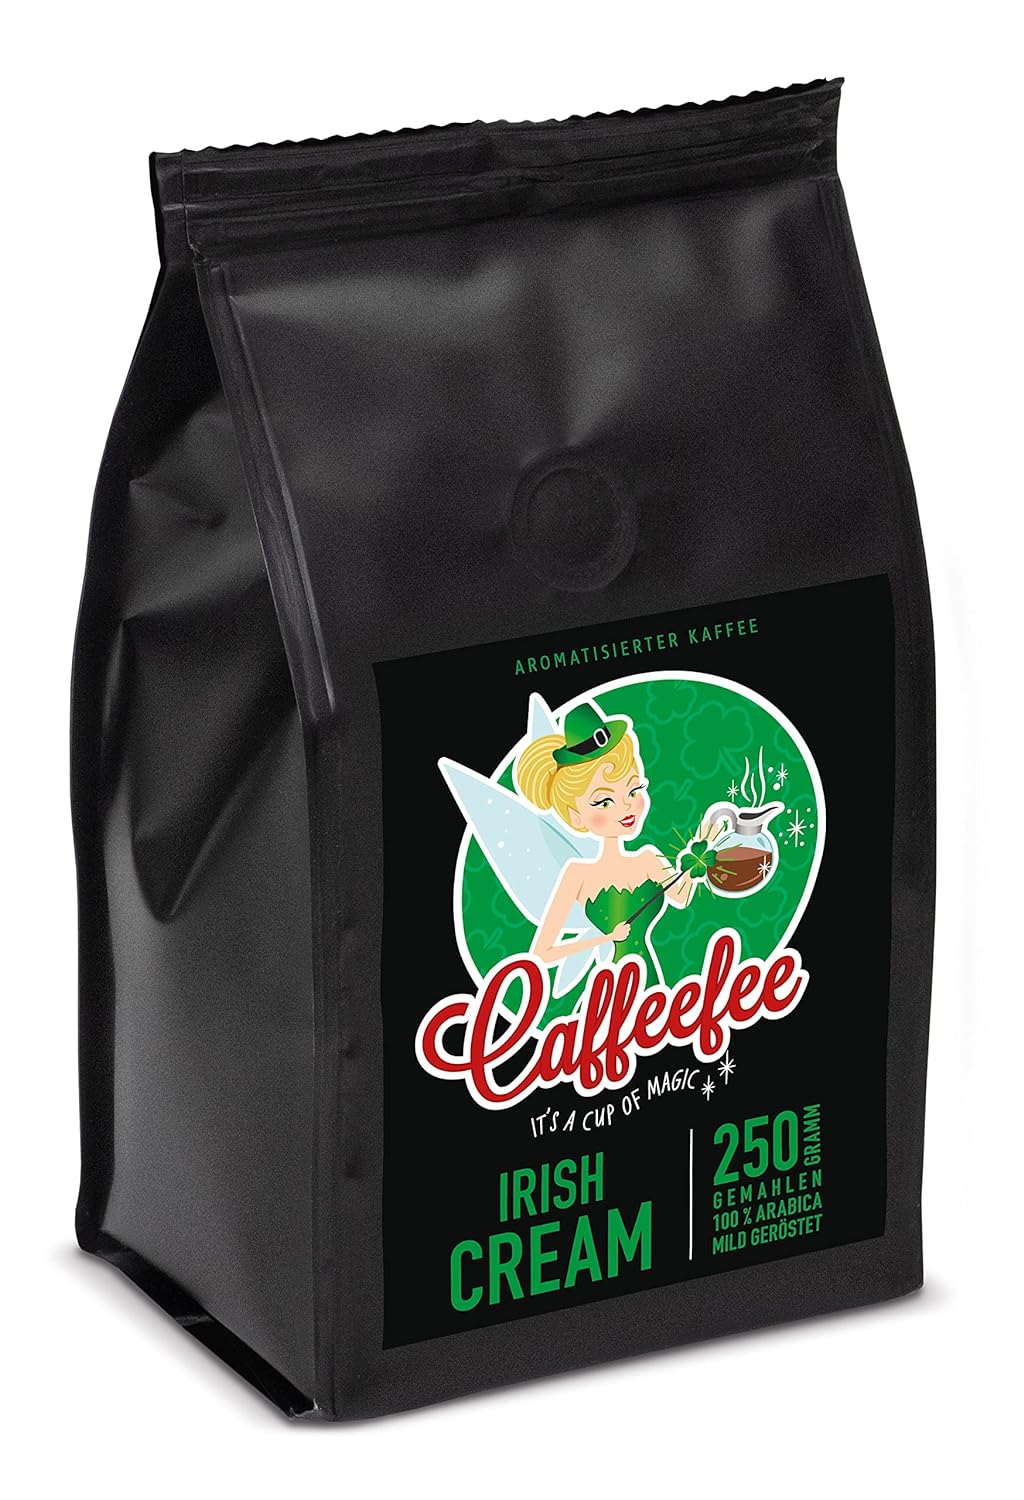 Caffeefee Irish Cream Ground Flavored Roasted Coffee Made from 100% Arabica Beans, Mild Roasted, Refined with Fine Aroma, 250 g